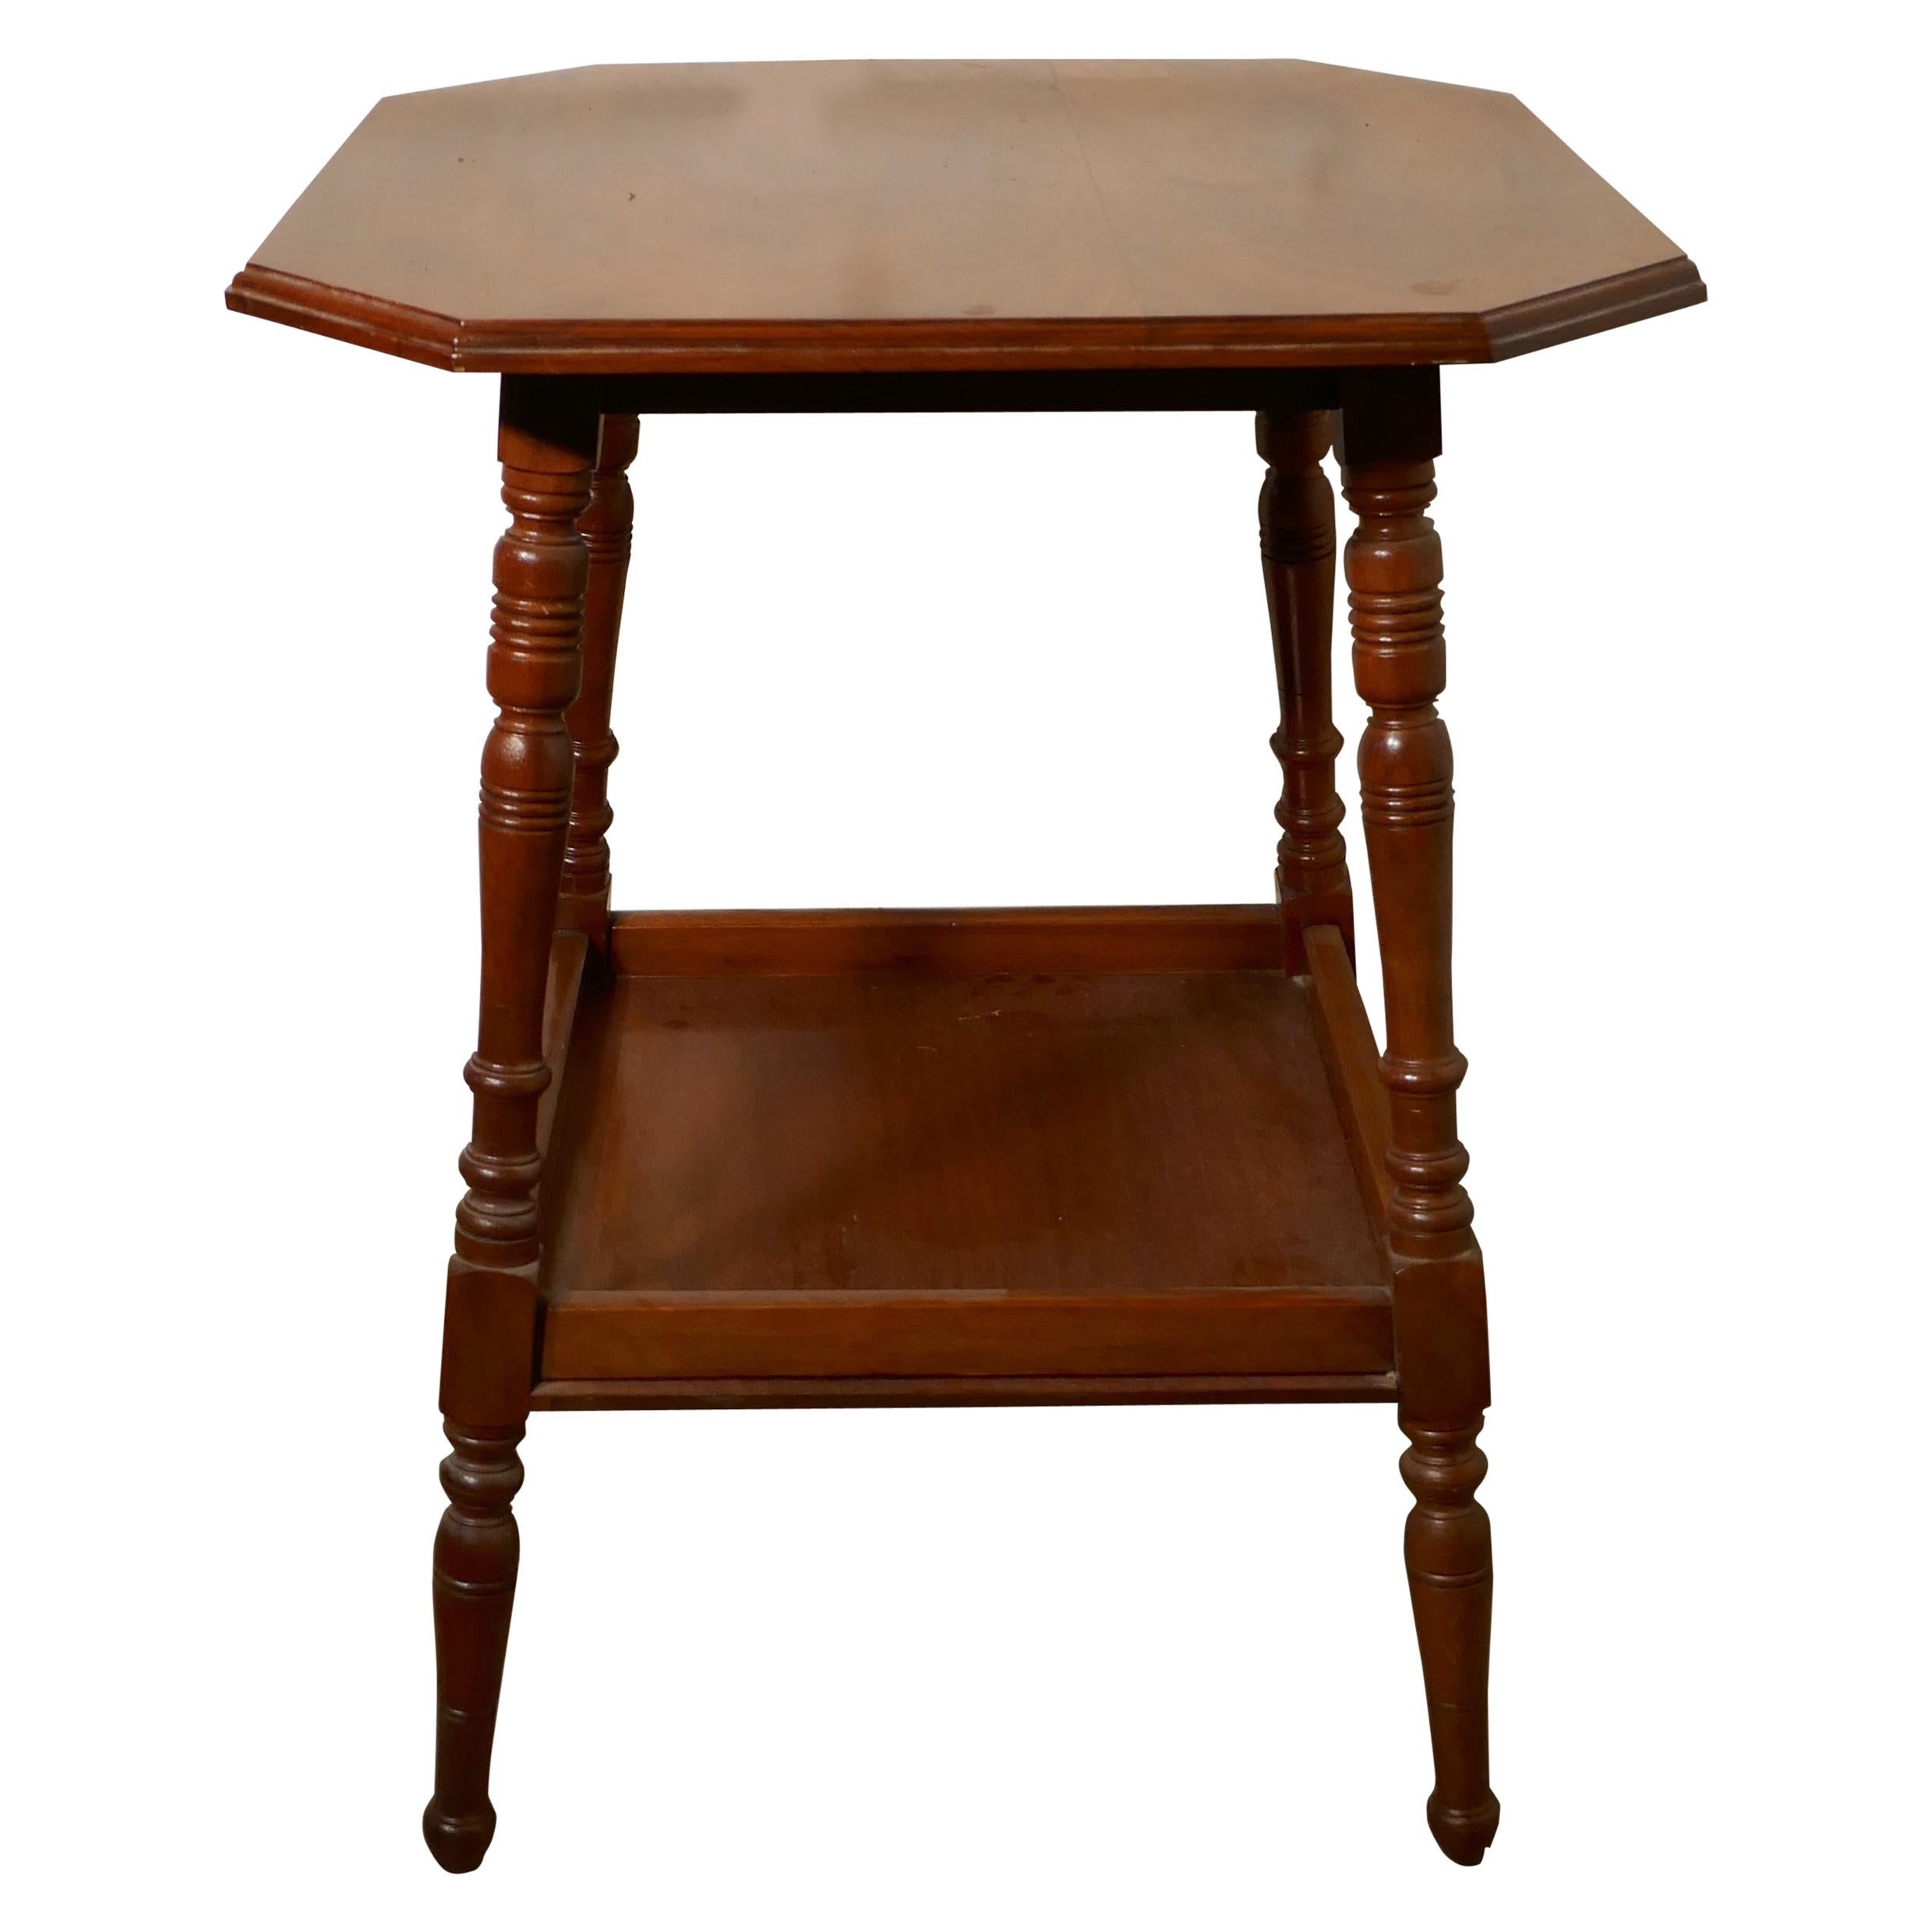 Edwardian Blonde Mahogany Étagère or Occasional Table